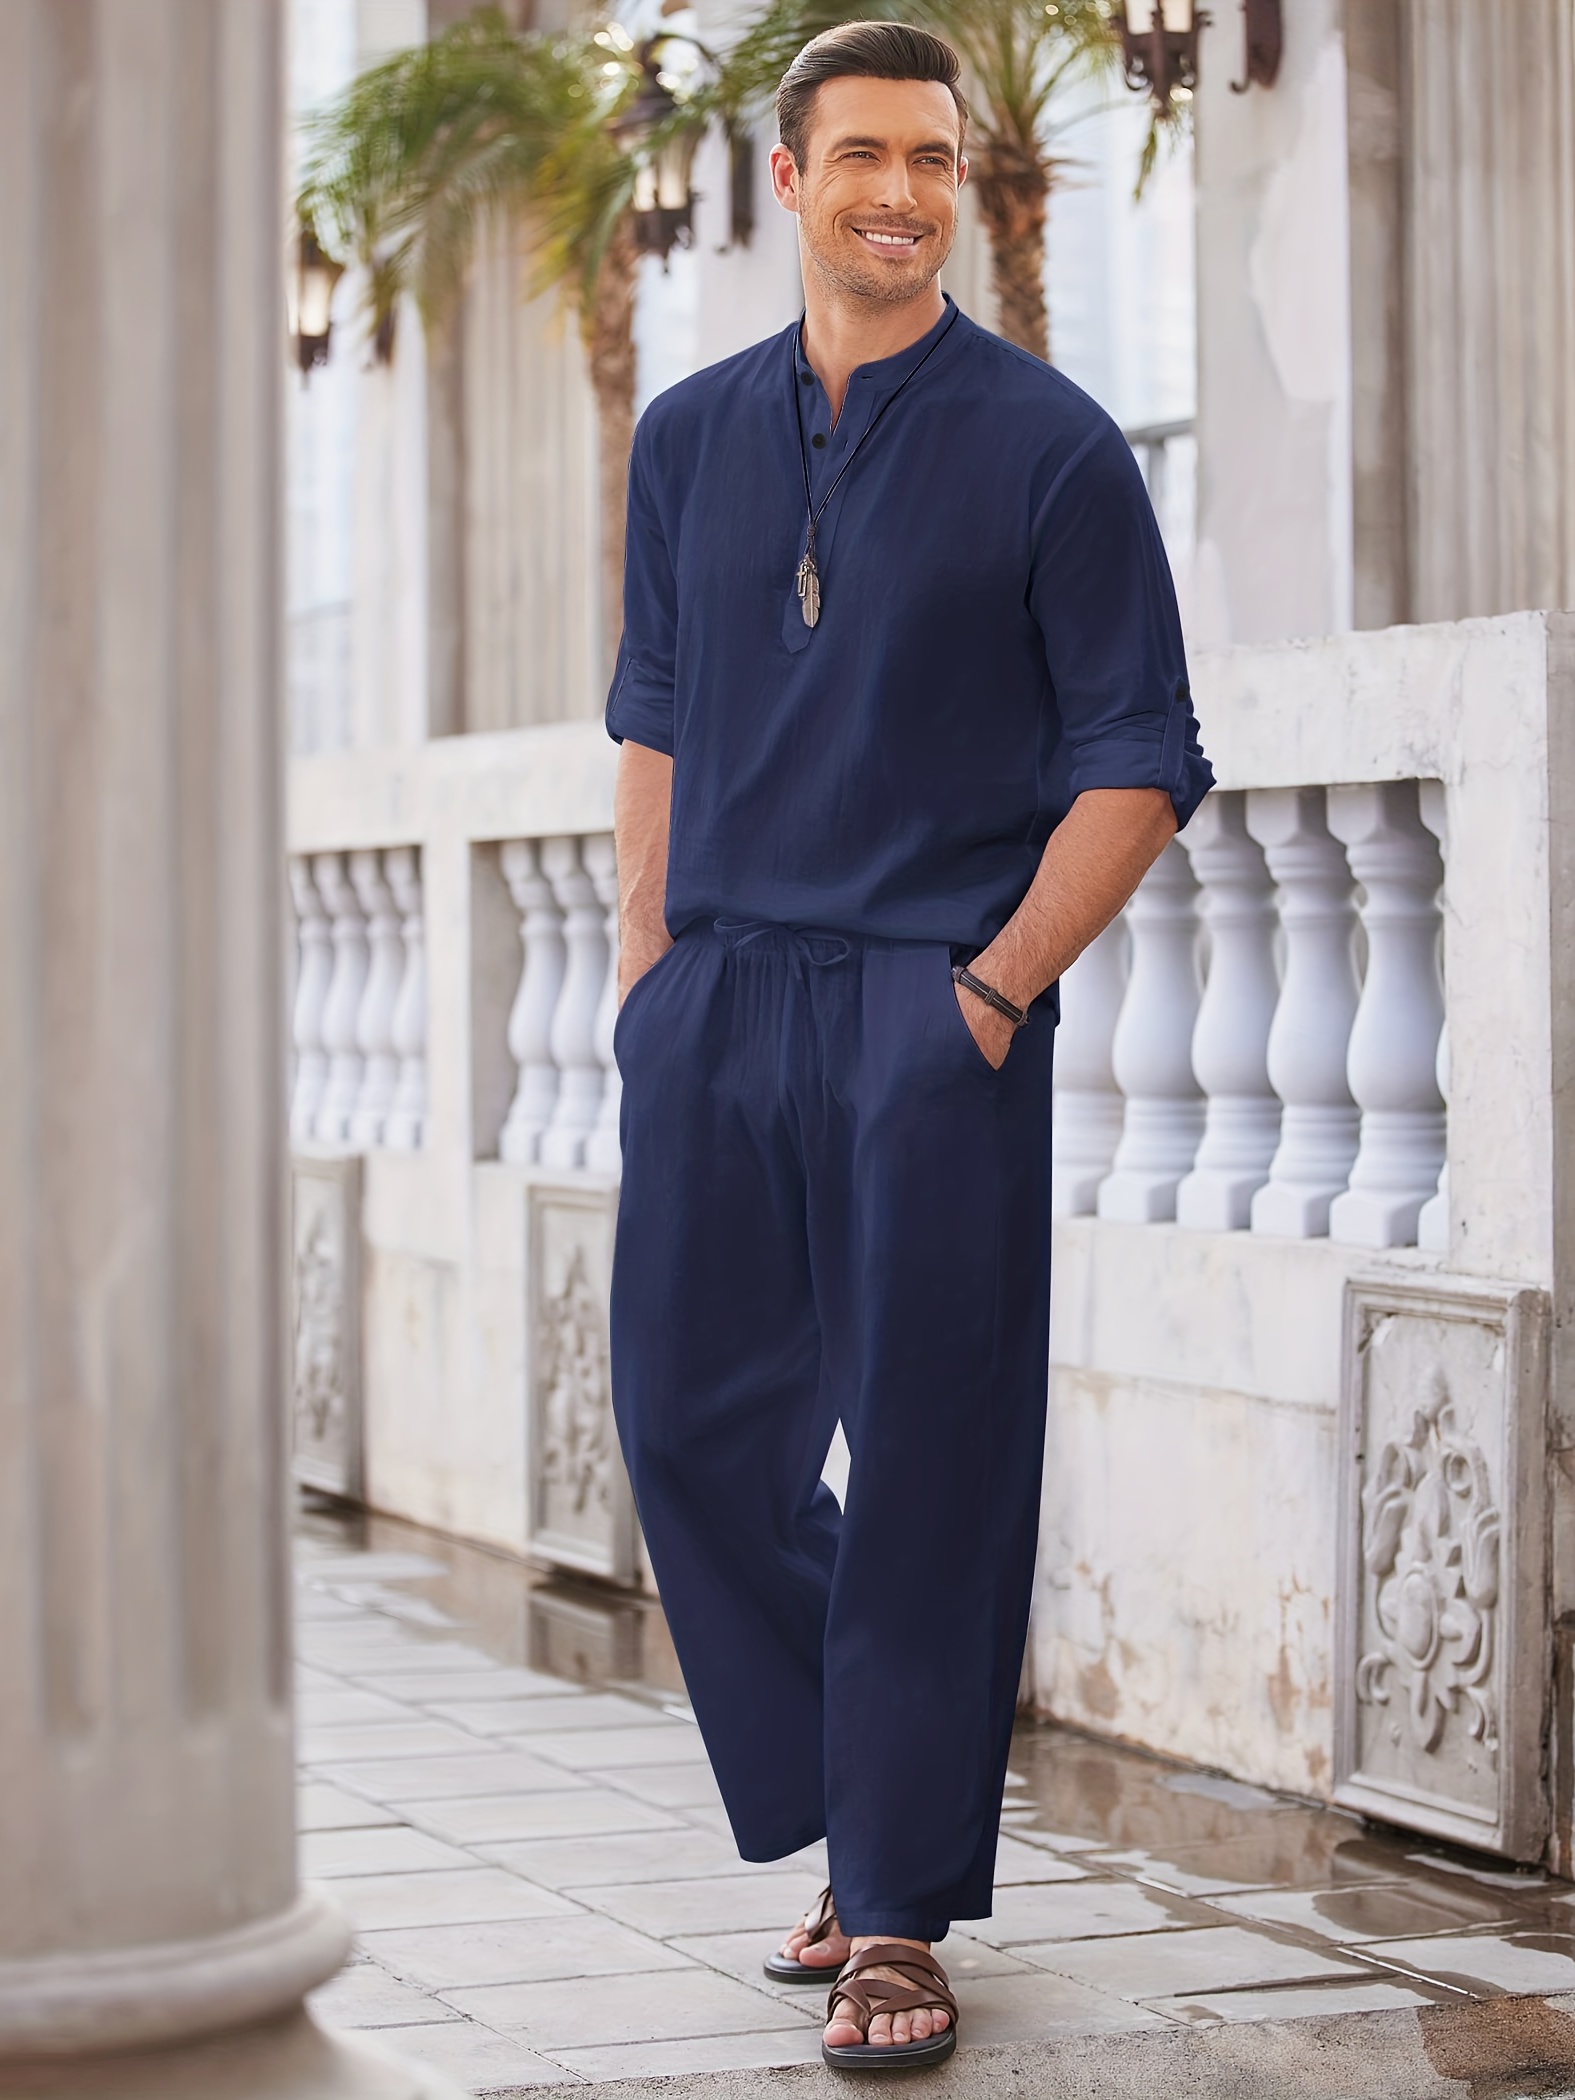 20 Cool and Comfy Loungewear Outfit Ideas for Men  Lounge wear, Outfits  for teens, Loungewear outfit